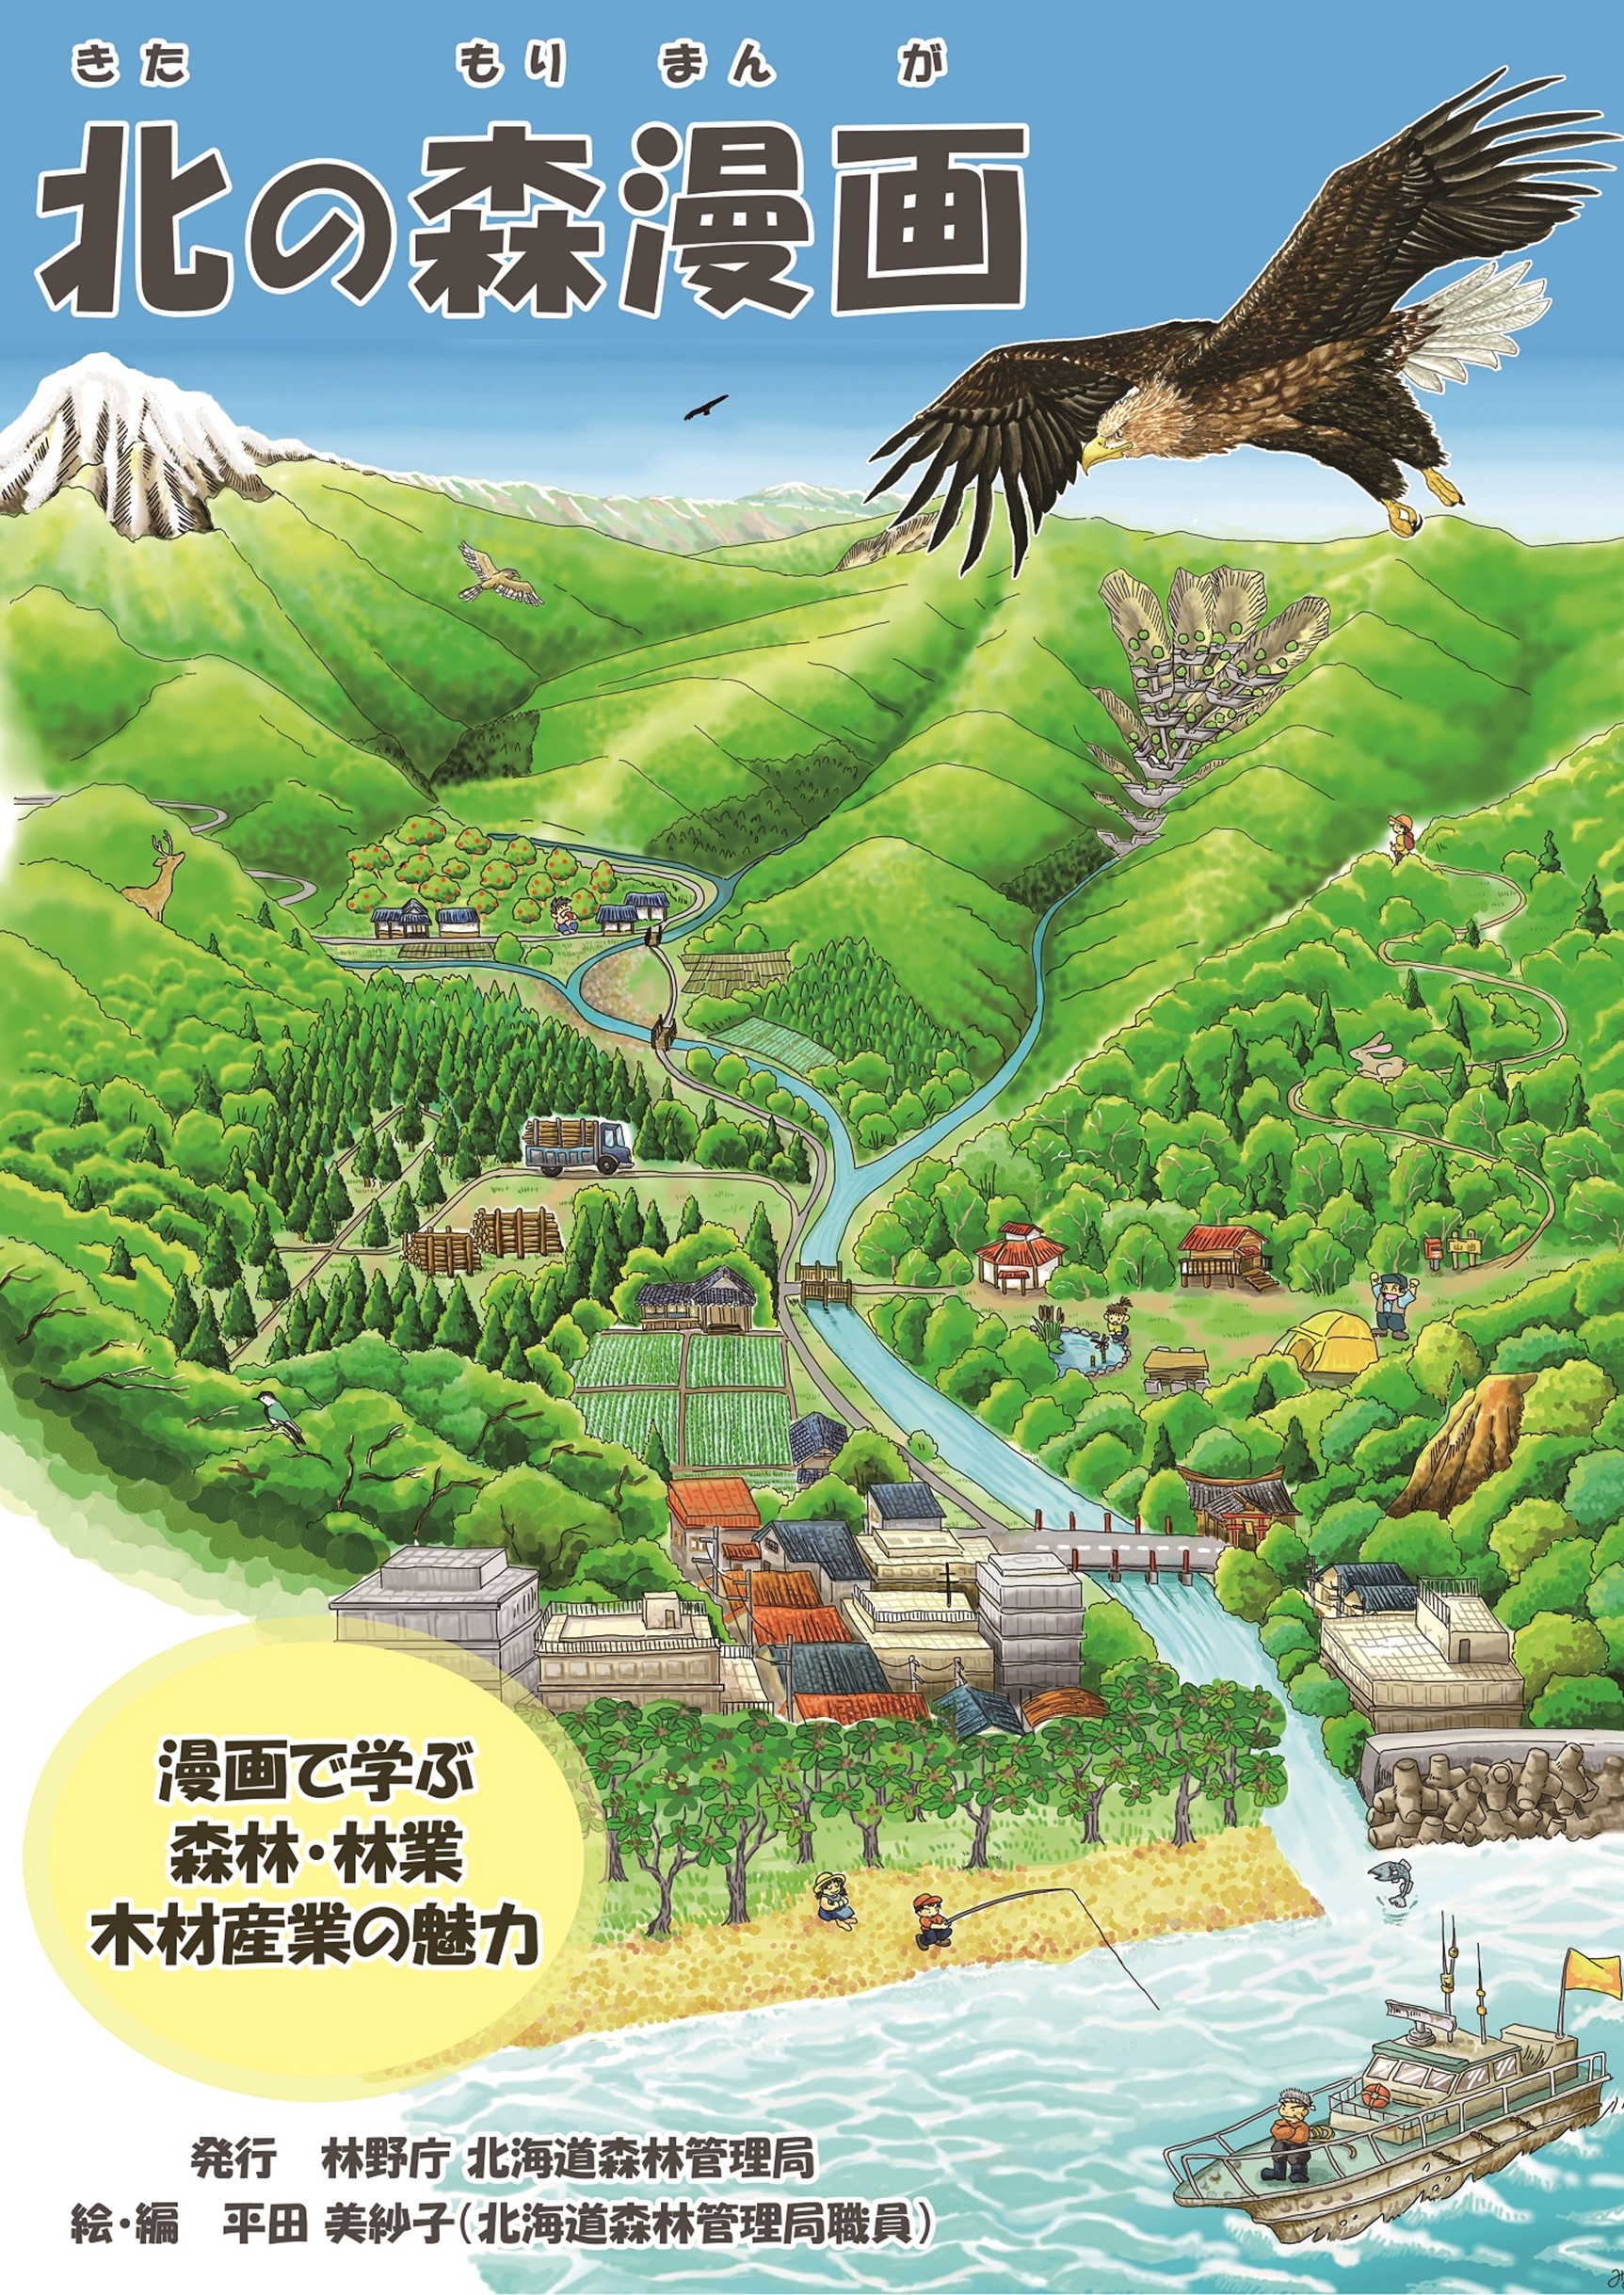 Hirata’s works are posted on the Hokkaido Regional Forest Office website.